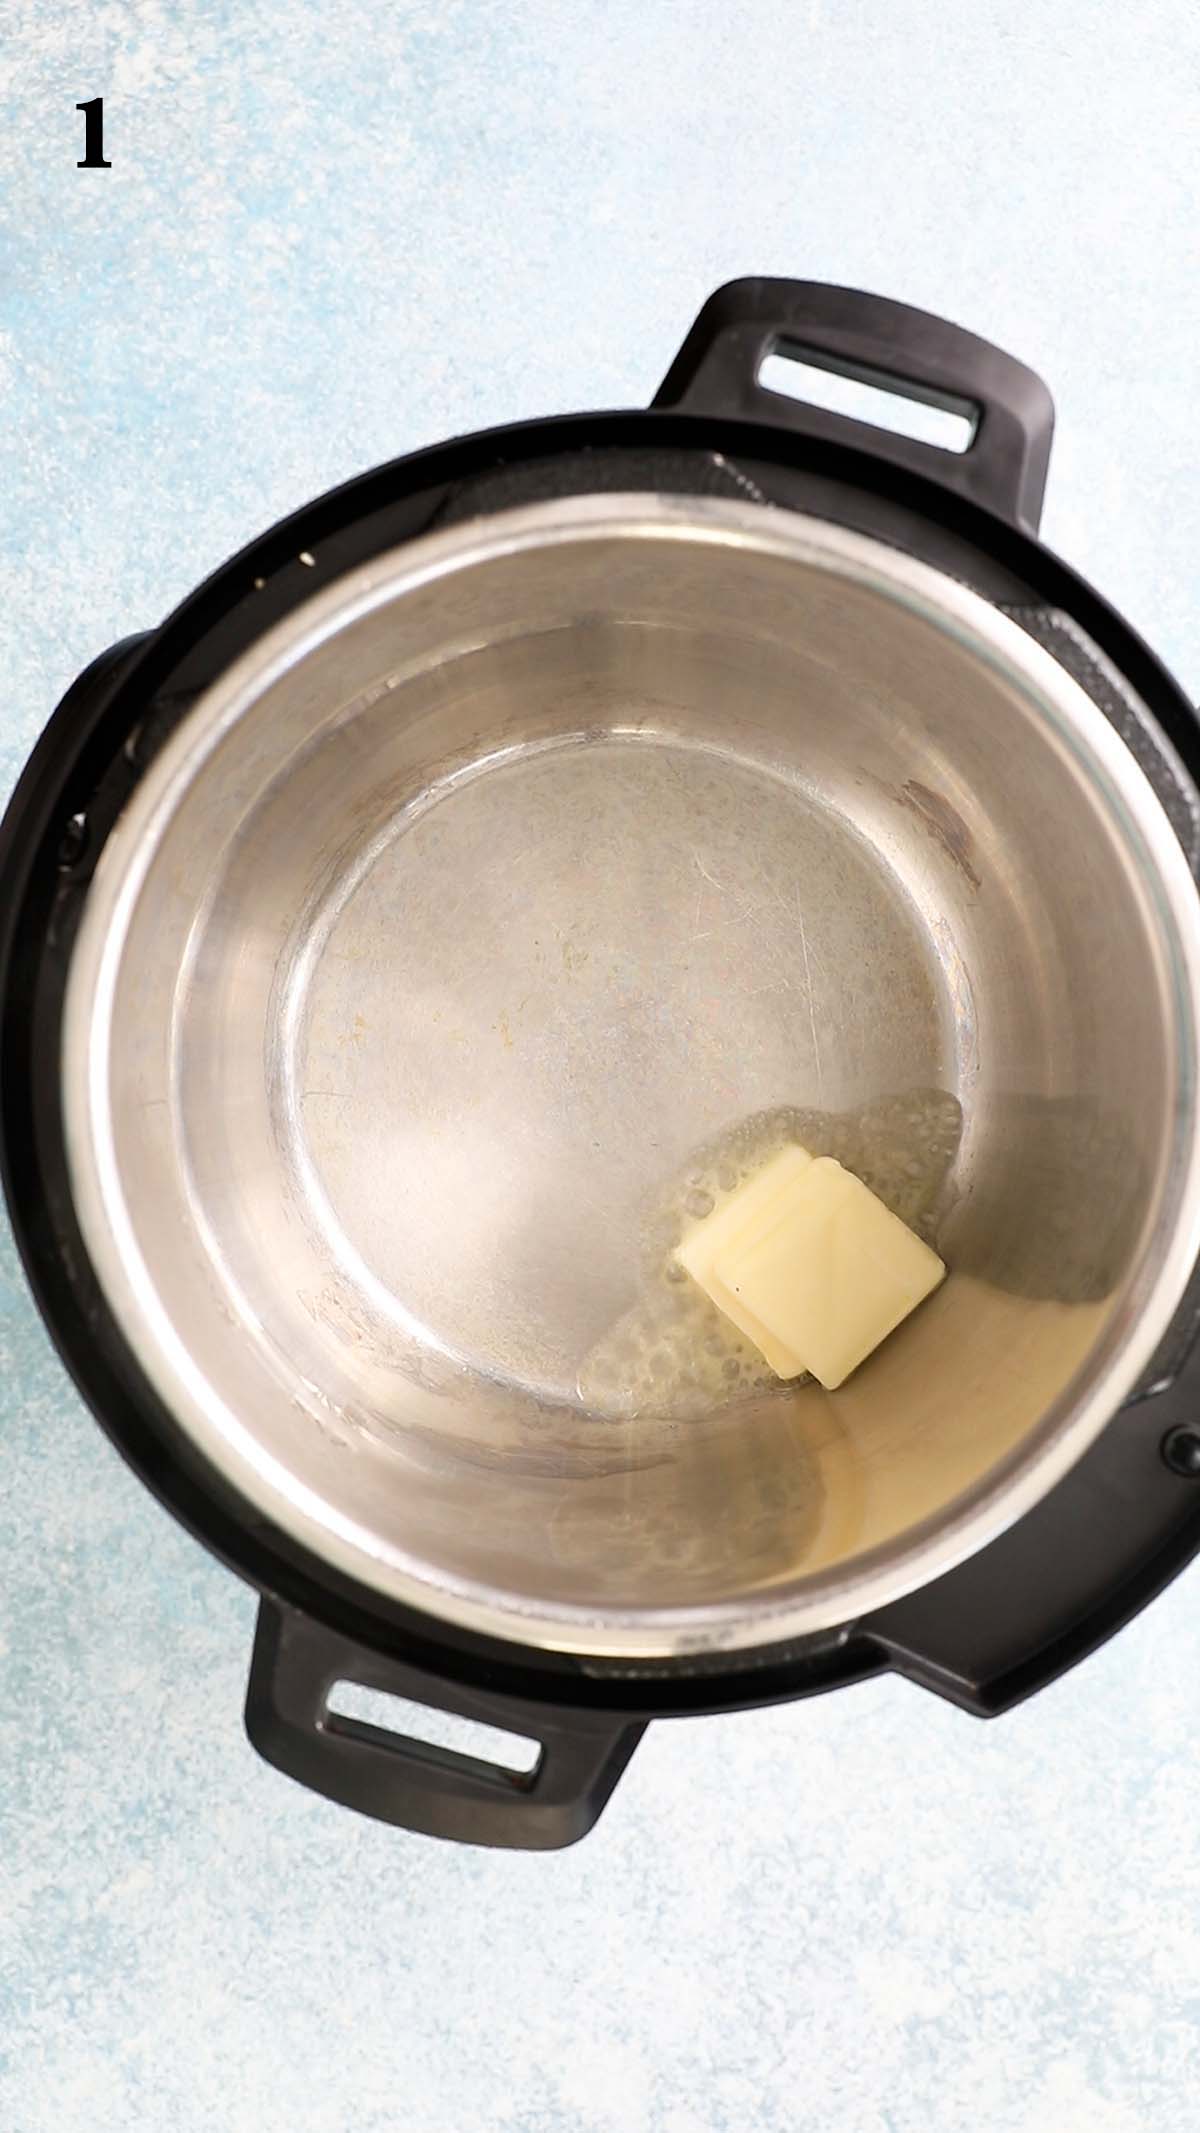 a dab of butter melting in a hot instant pot.